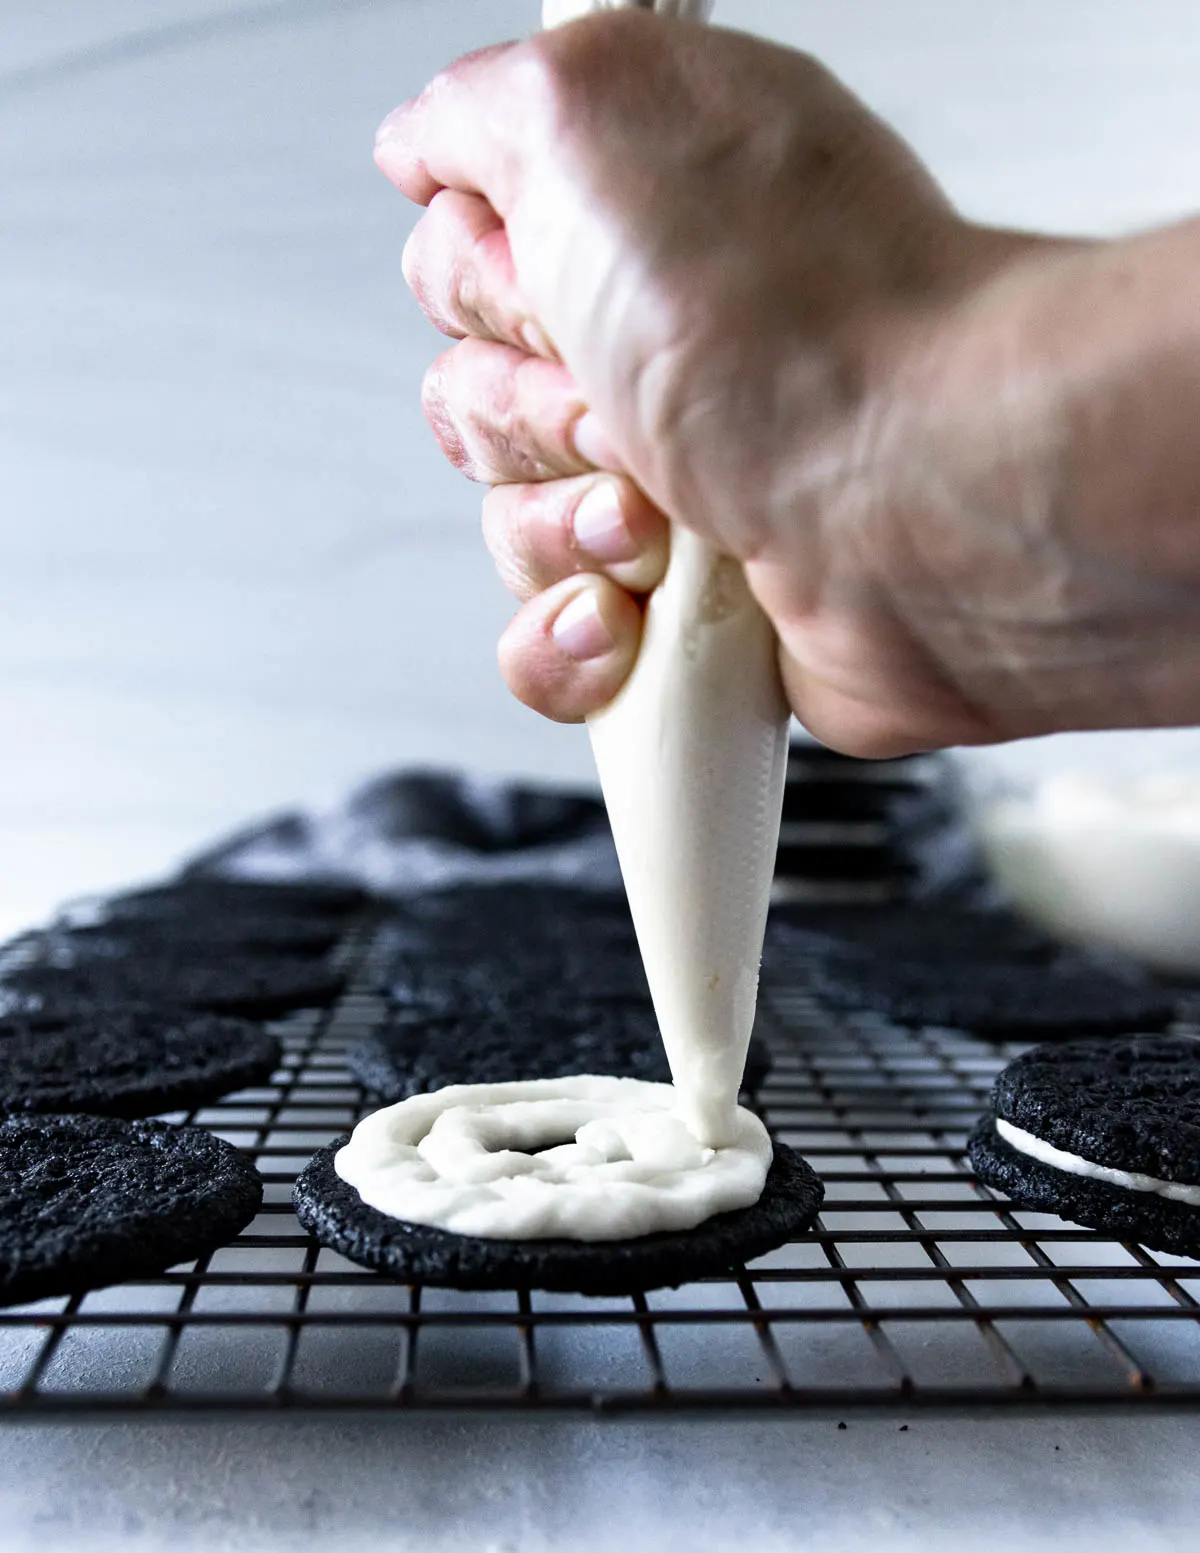 hand piping creme filling onto a cookie